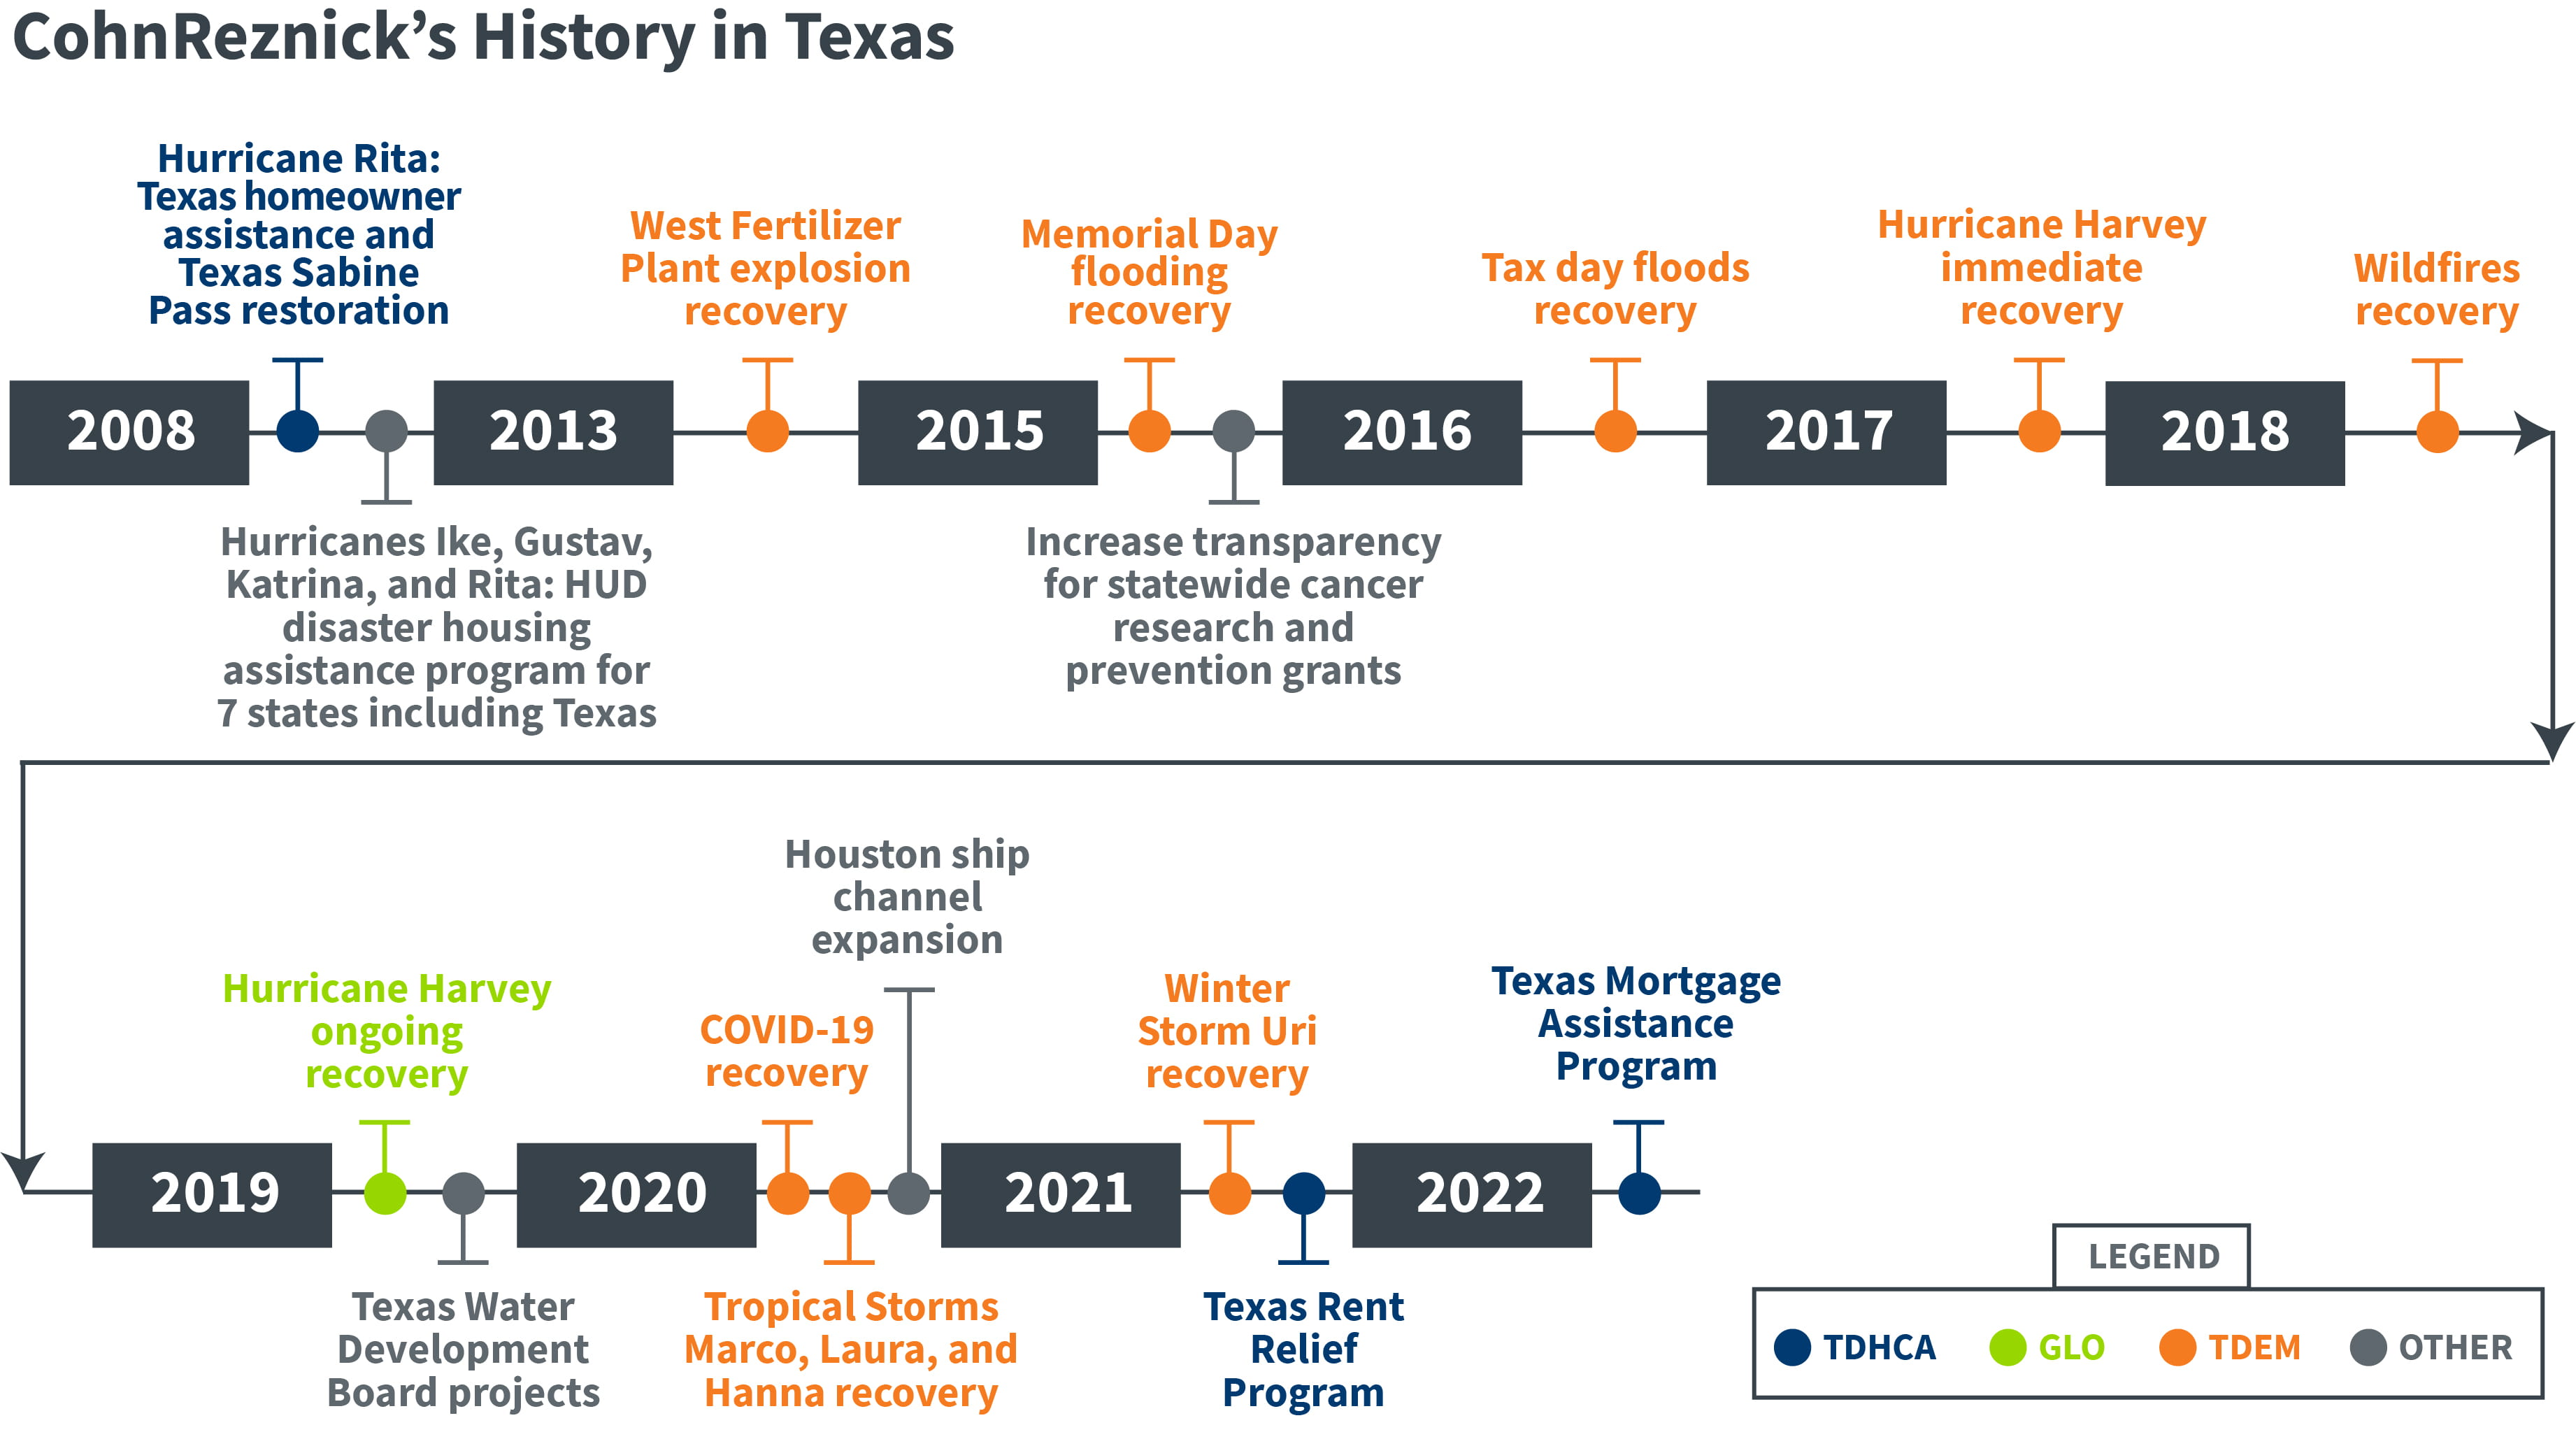 infographic showing timeline of CohnReznick providing services to state of Texas